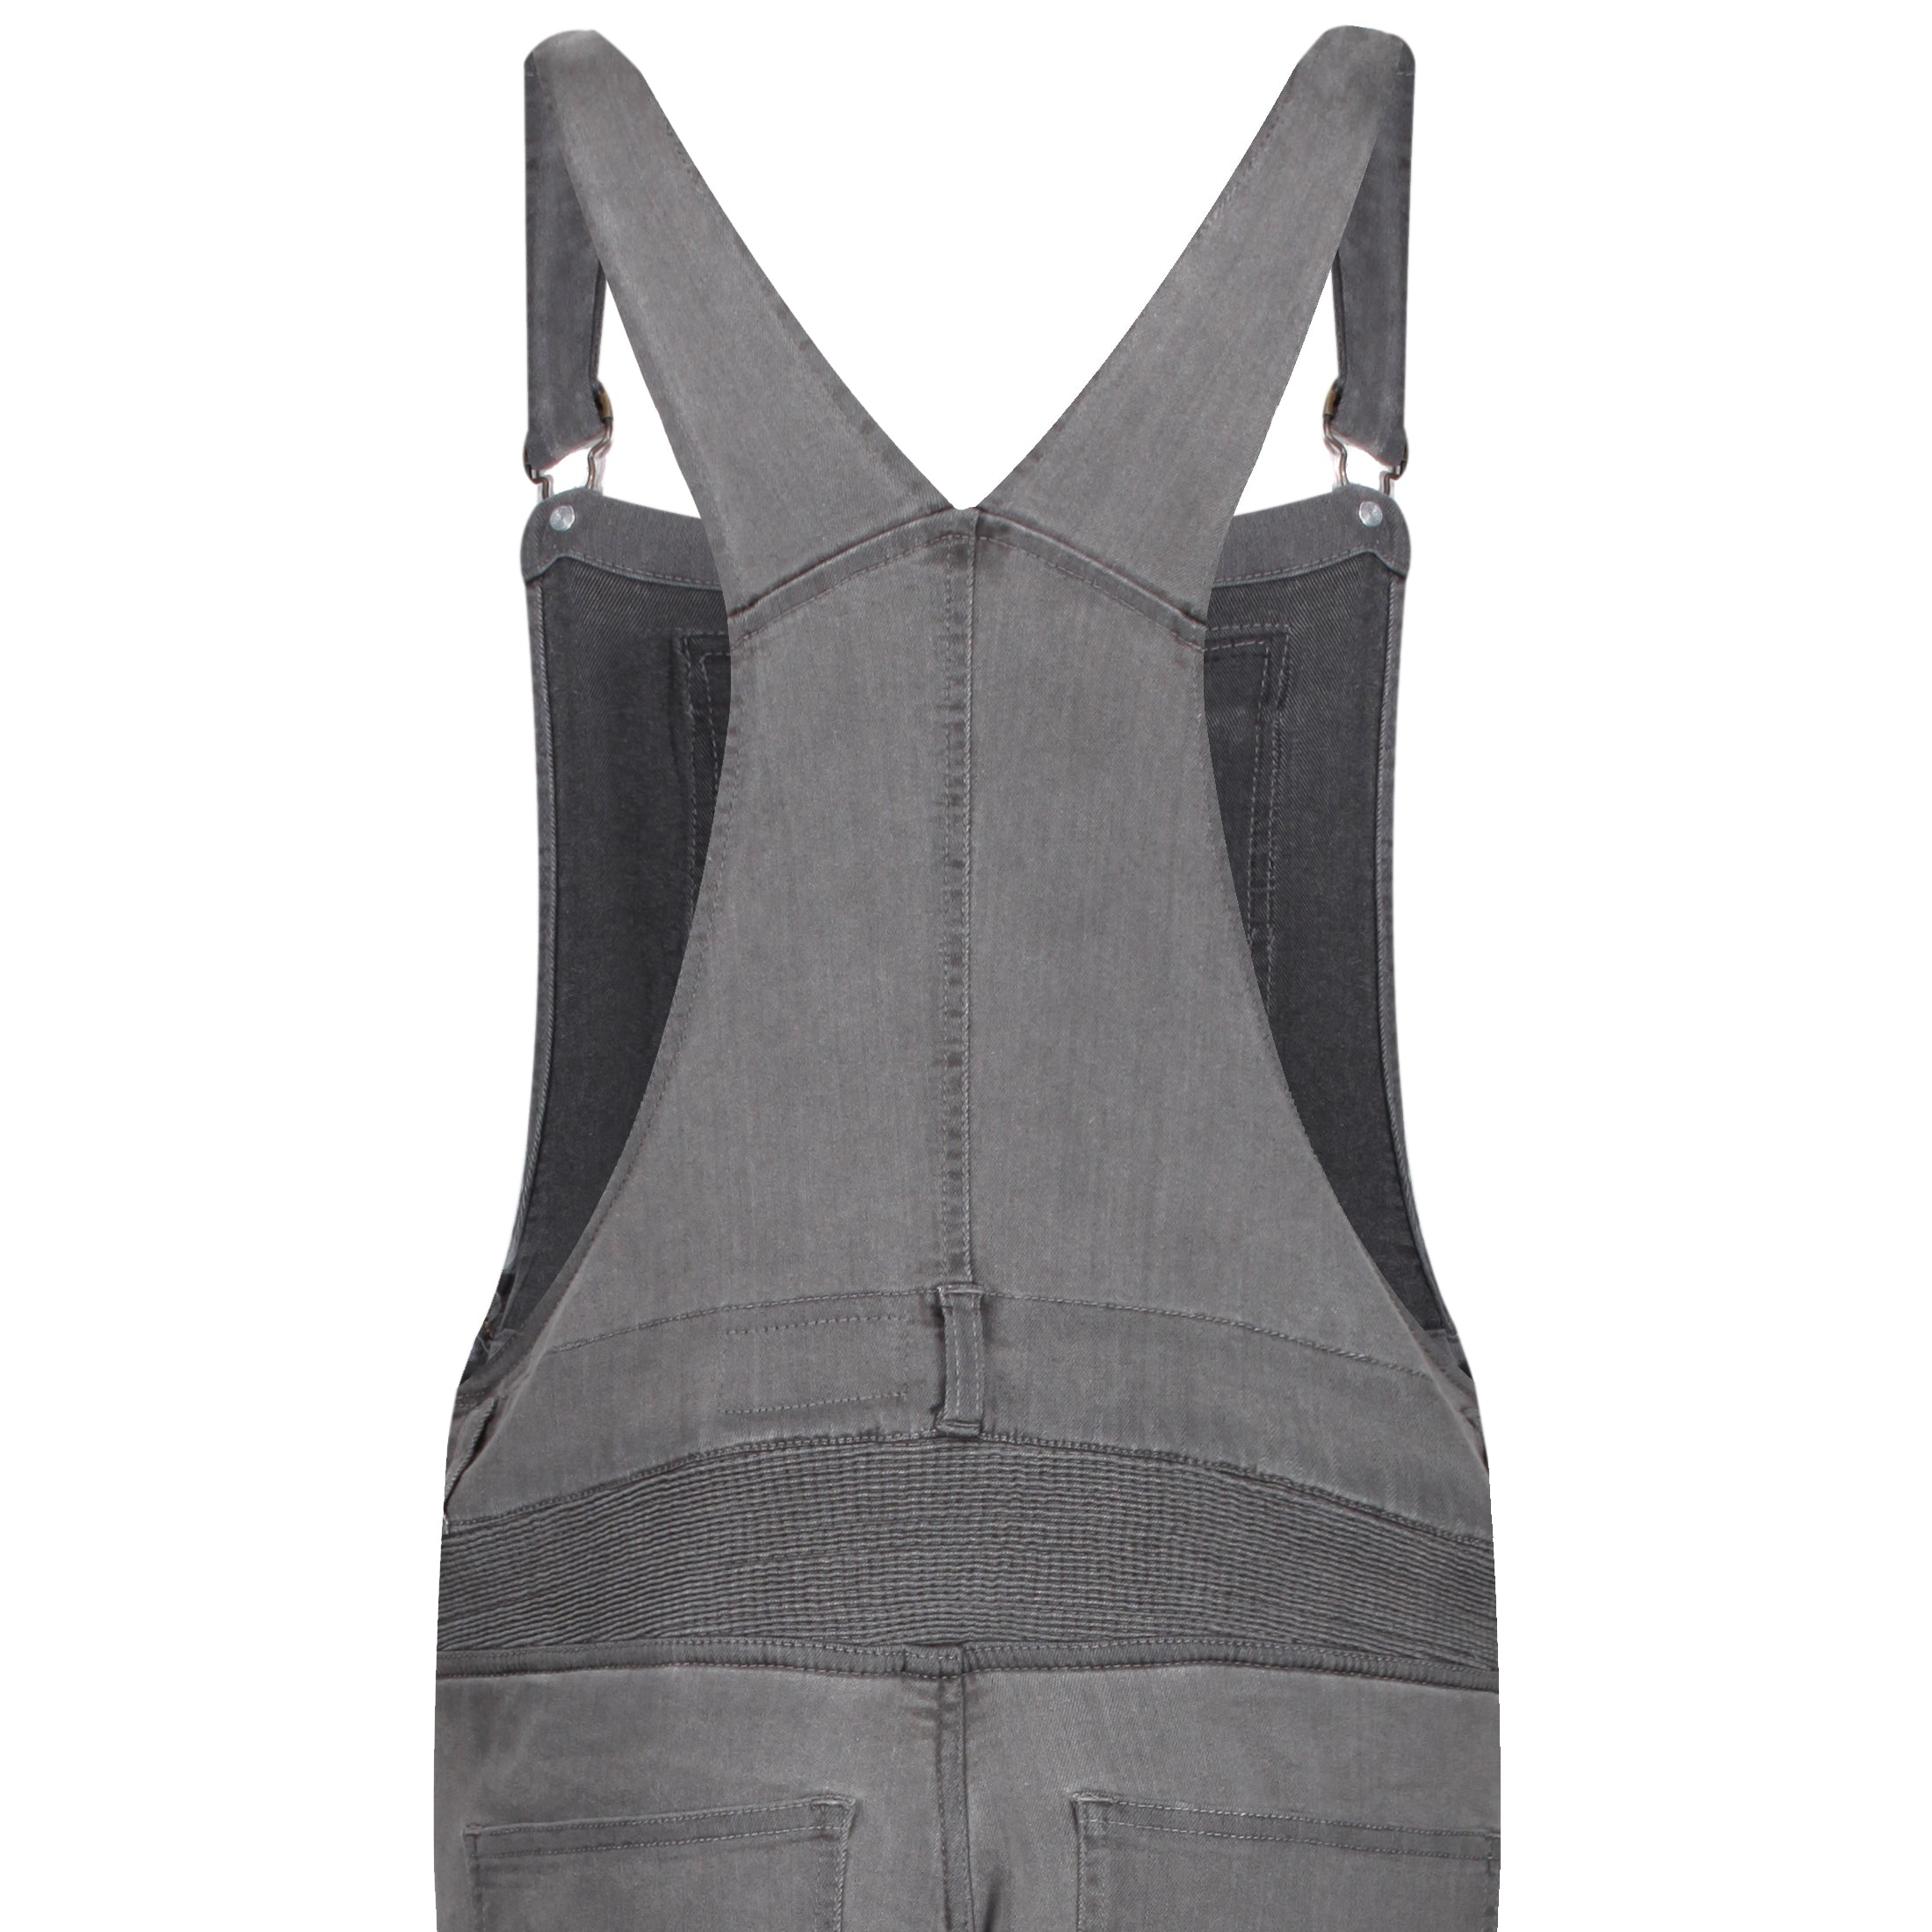 Grey kevlar motorcycle overall for women from Motogirl back close up